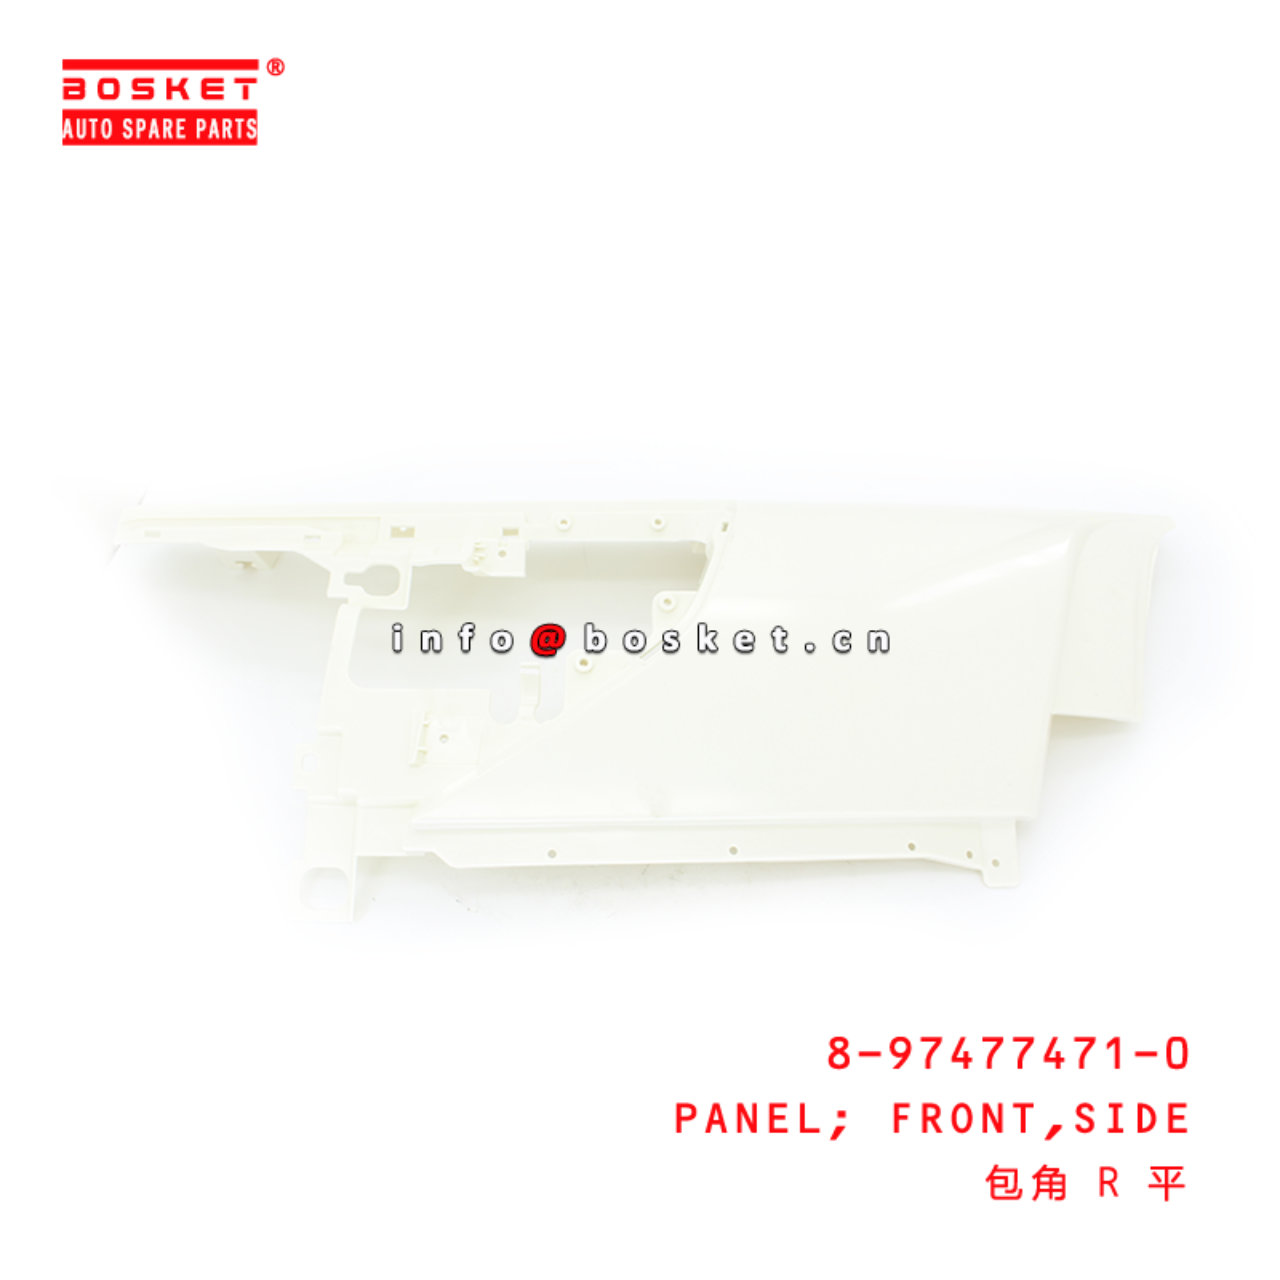 8-97477471-0 Side Front Panel suitable for ISUZU 700P 8974774710 